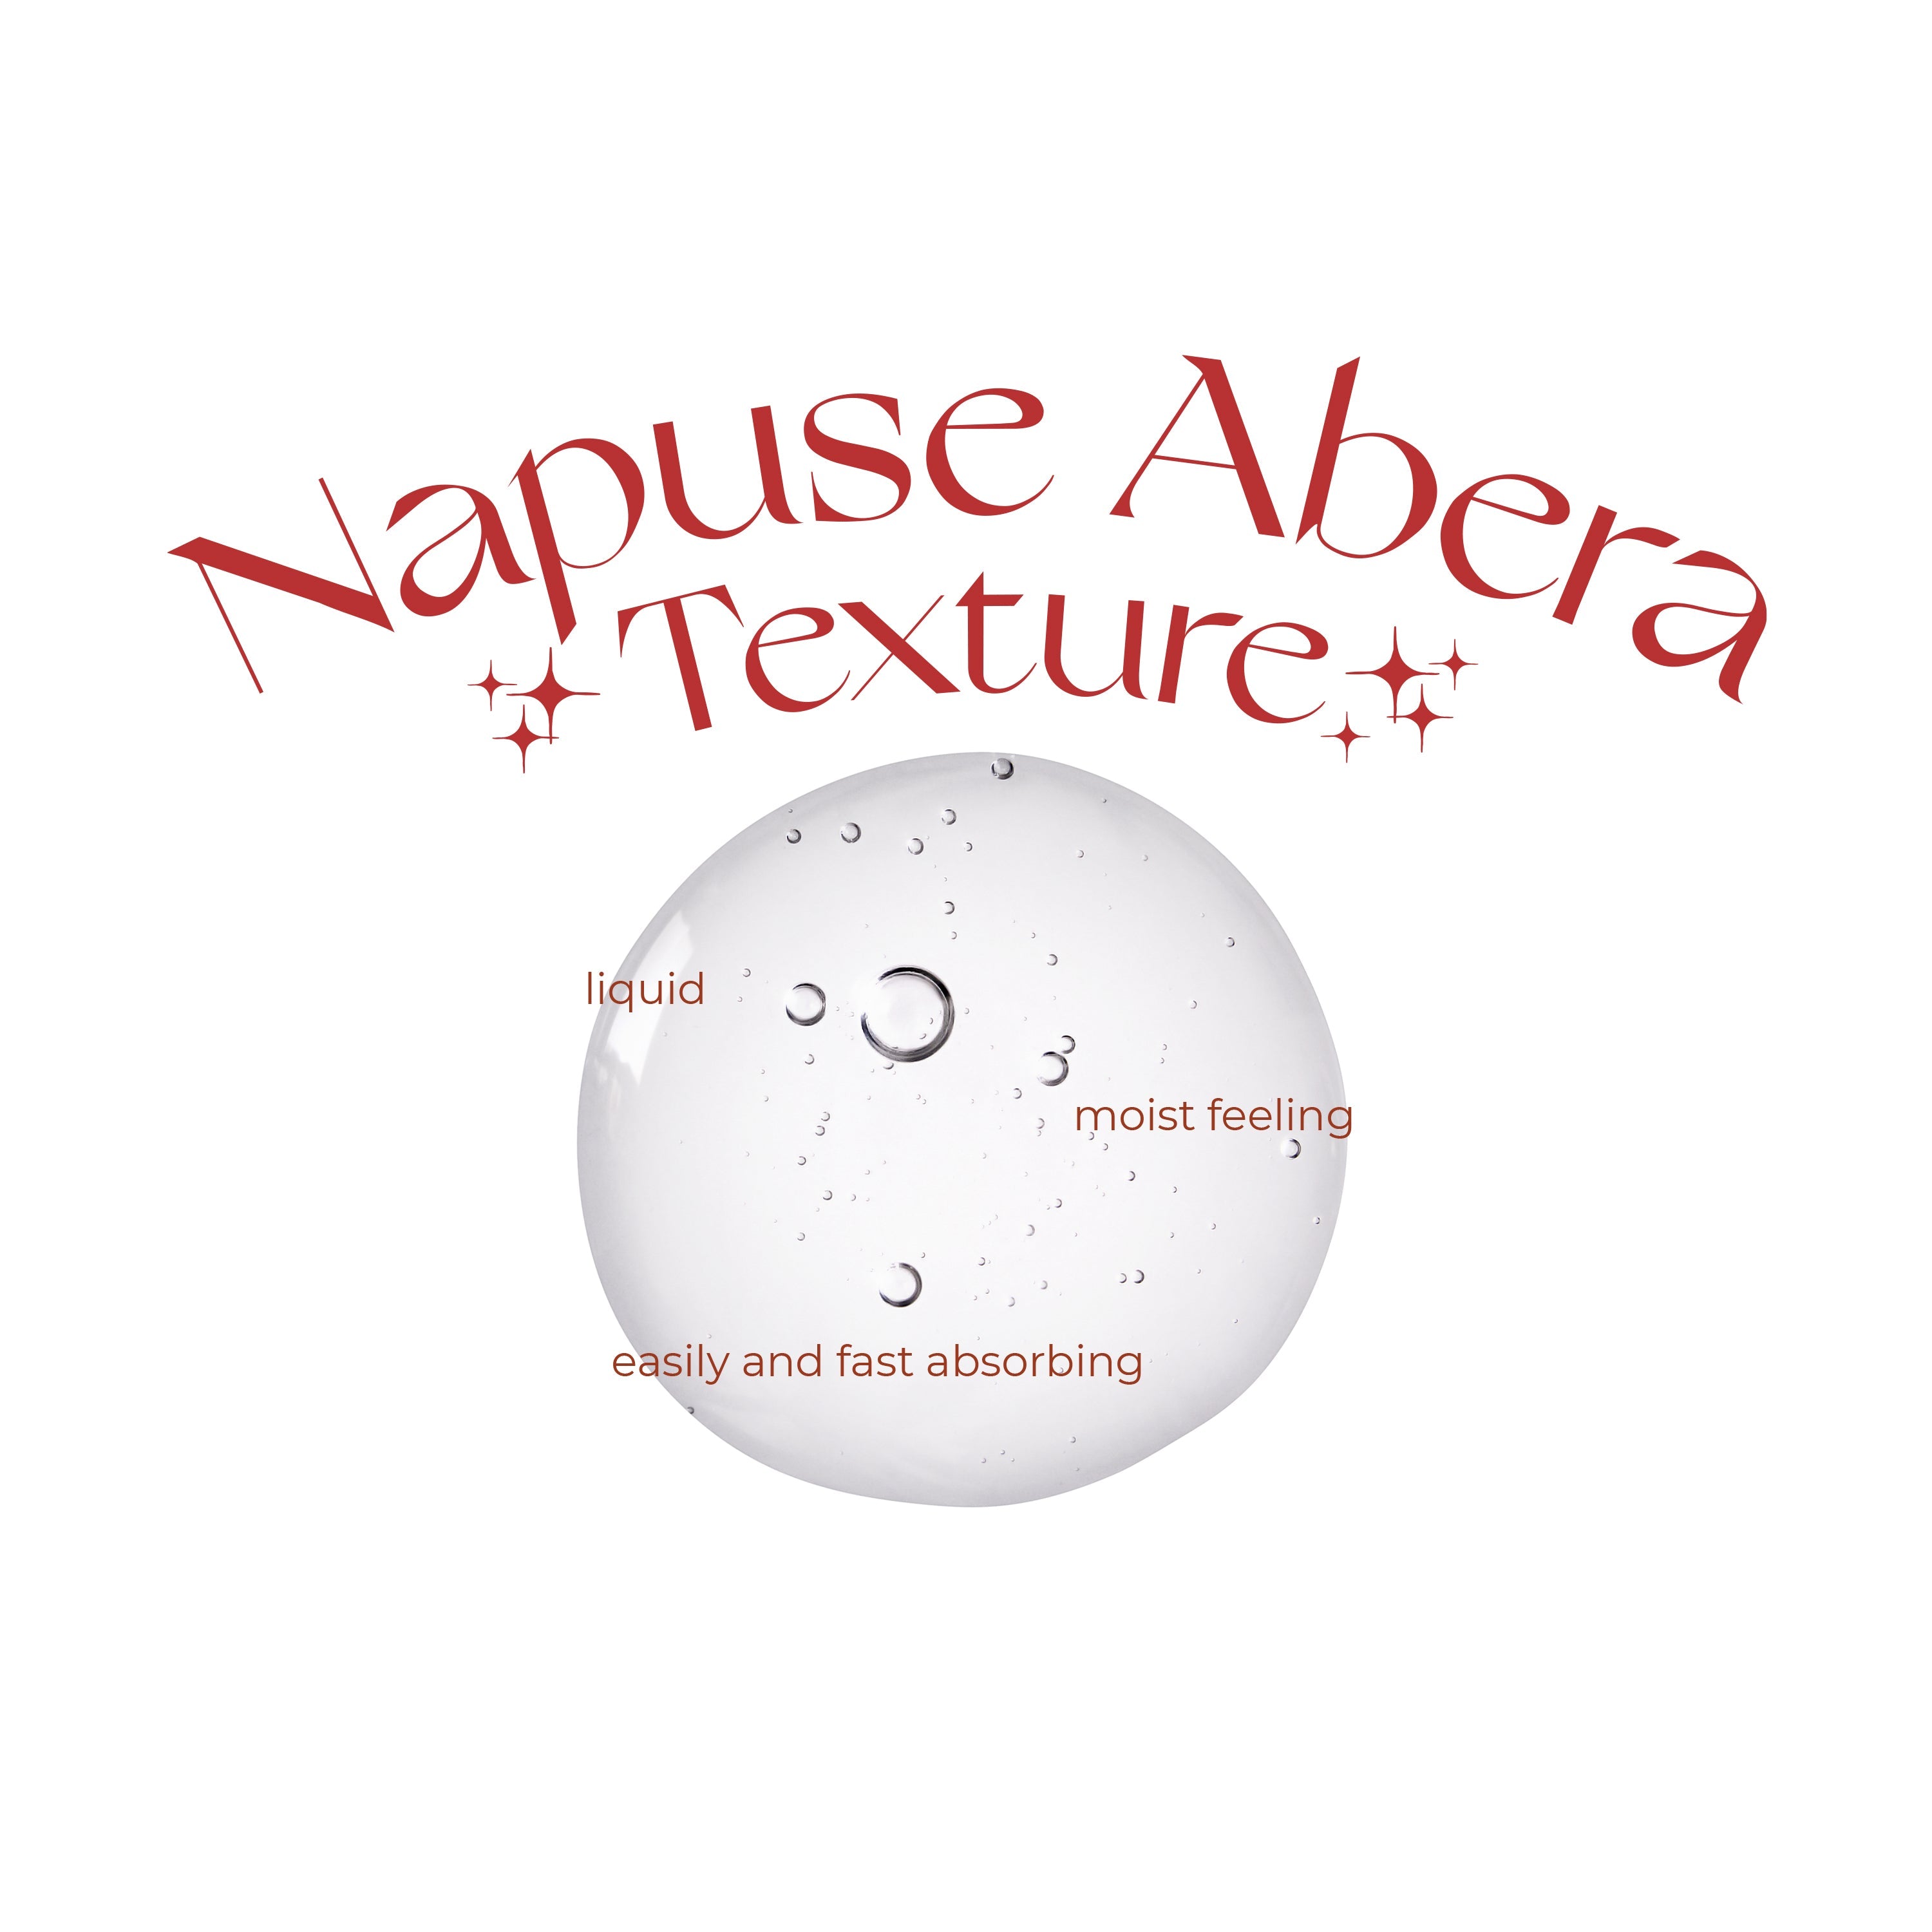 Napuse Abera Serum - Facial Skin Care, Anti-aging, Extensively Nourishing and Promoting the Regeneration of The Skin